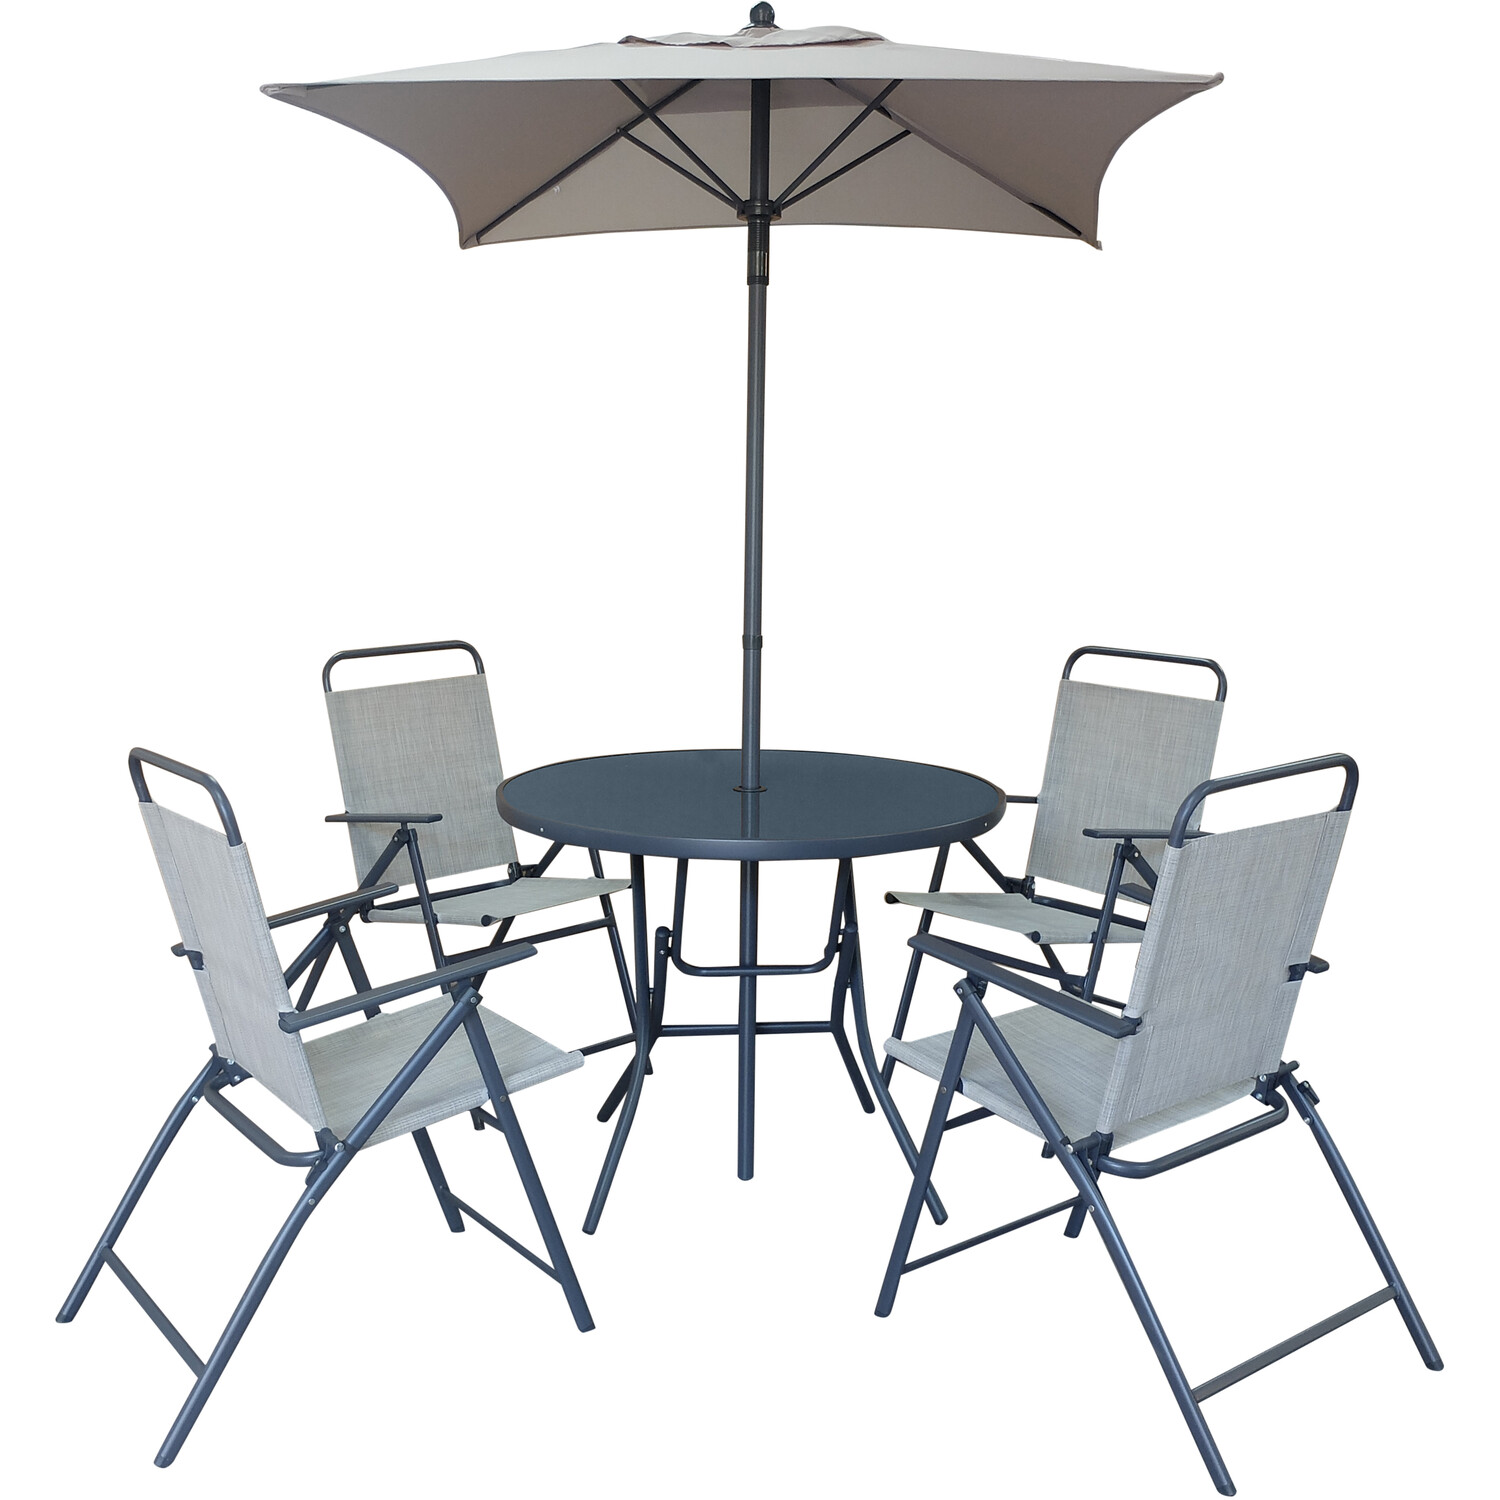 Malay Outdoor Essentials Safina 4 Seater Foldable Patio Dining Set Sage Image 2